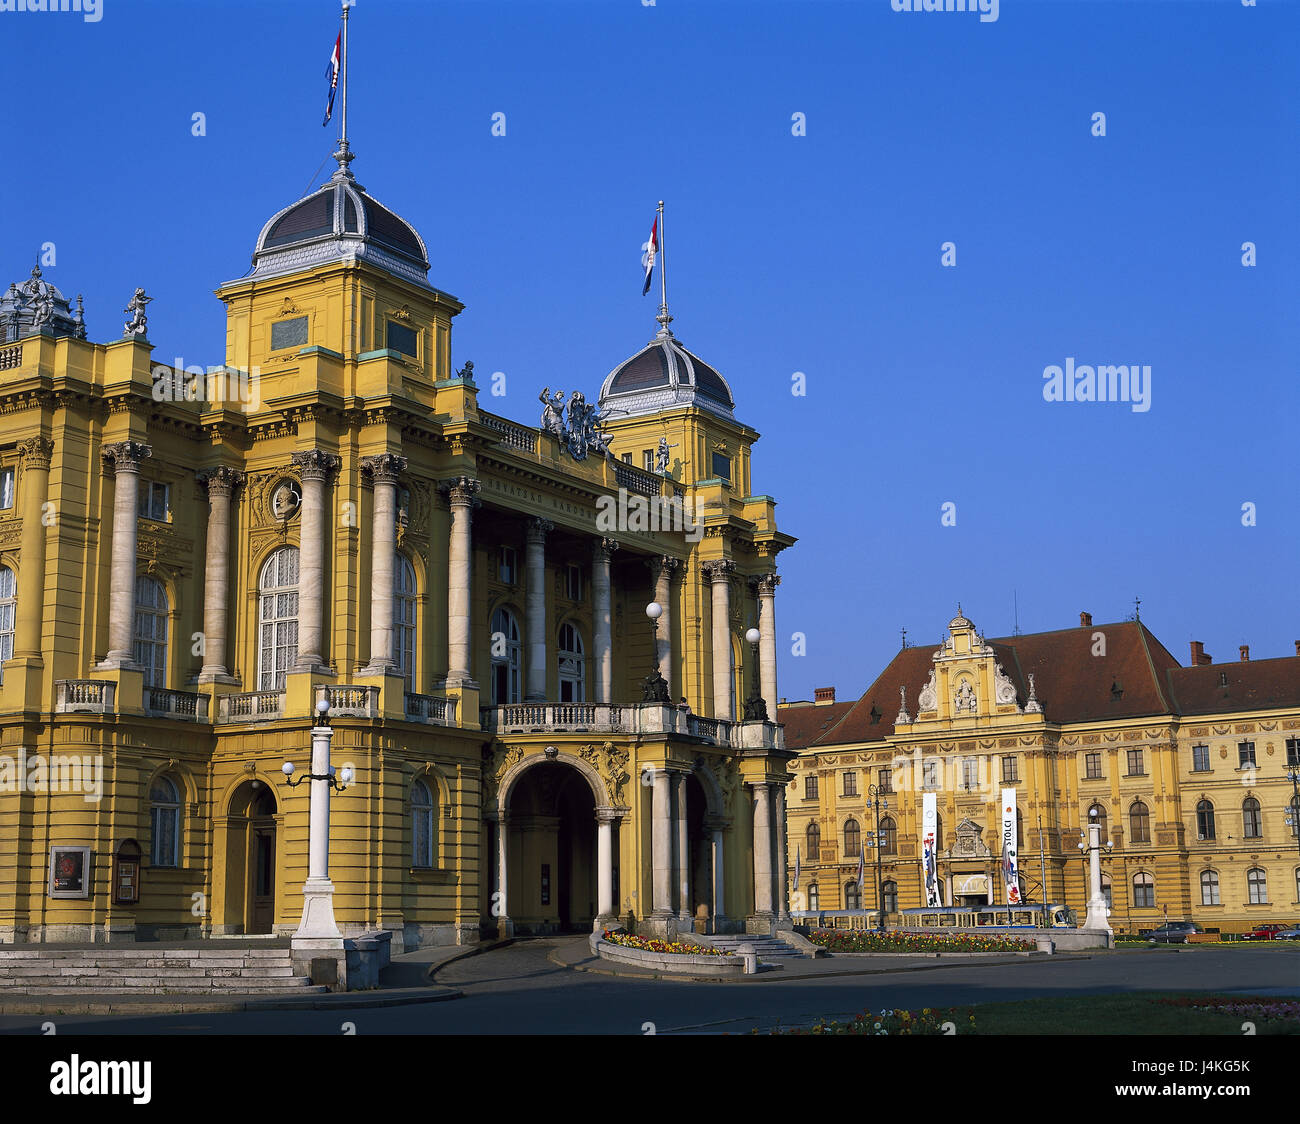 Croatia, Zagreb, Marshal Tito Platz, Croatian national theatre of Europe, Southeast Europe, Balkan Peninsula, town, capital, city, city centre, square, theatre square, building, structure, place of interest, architecture, builds in 1894 Stock Photo